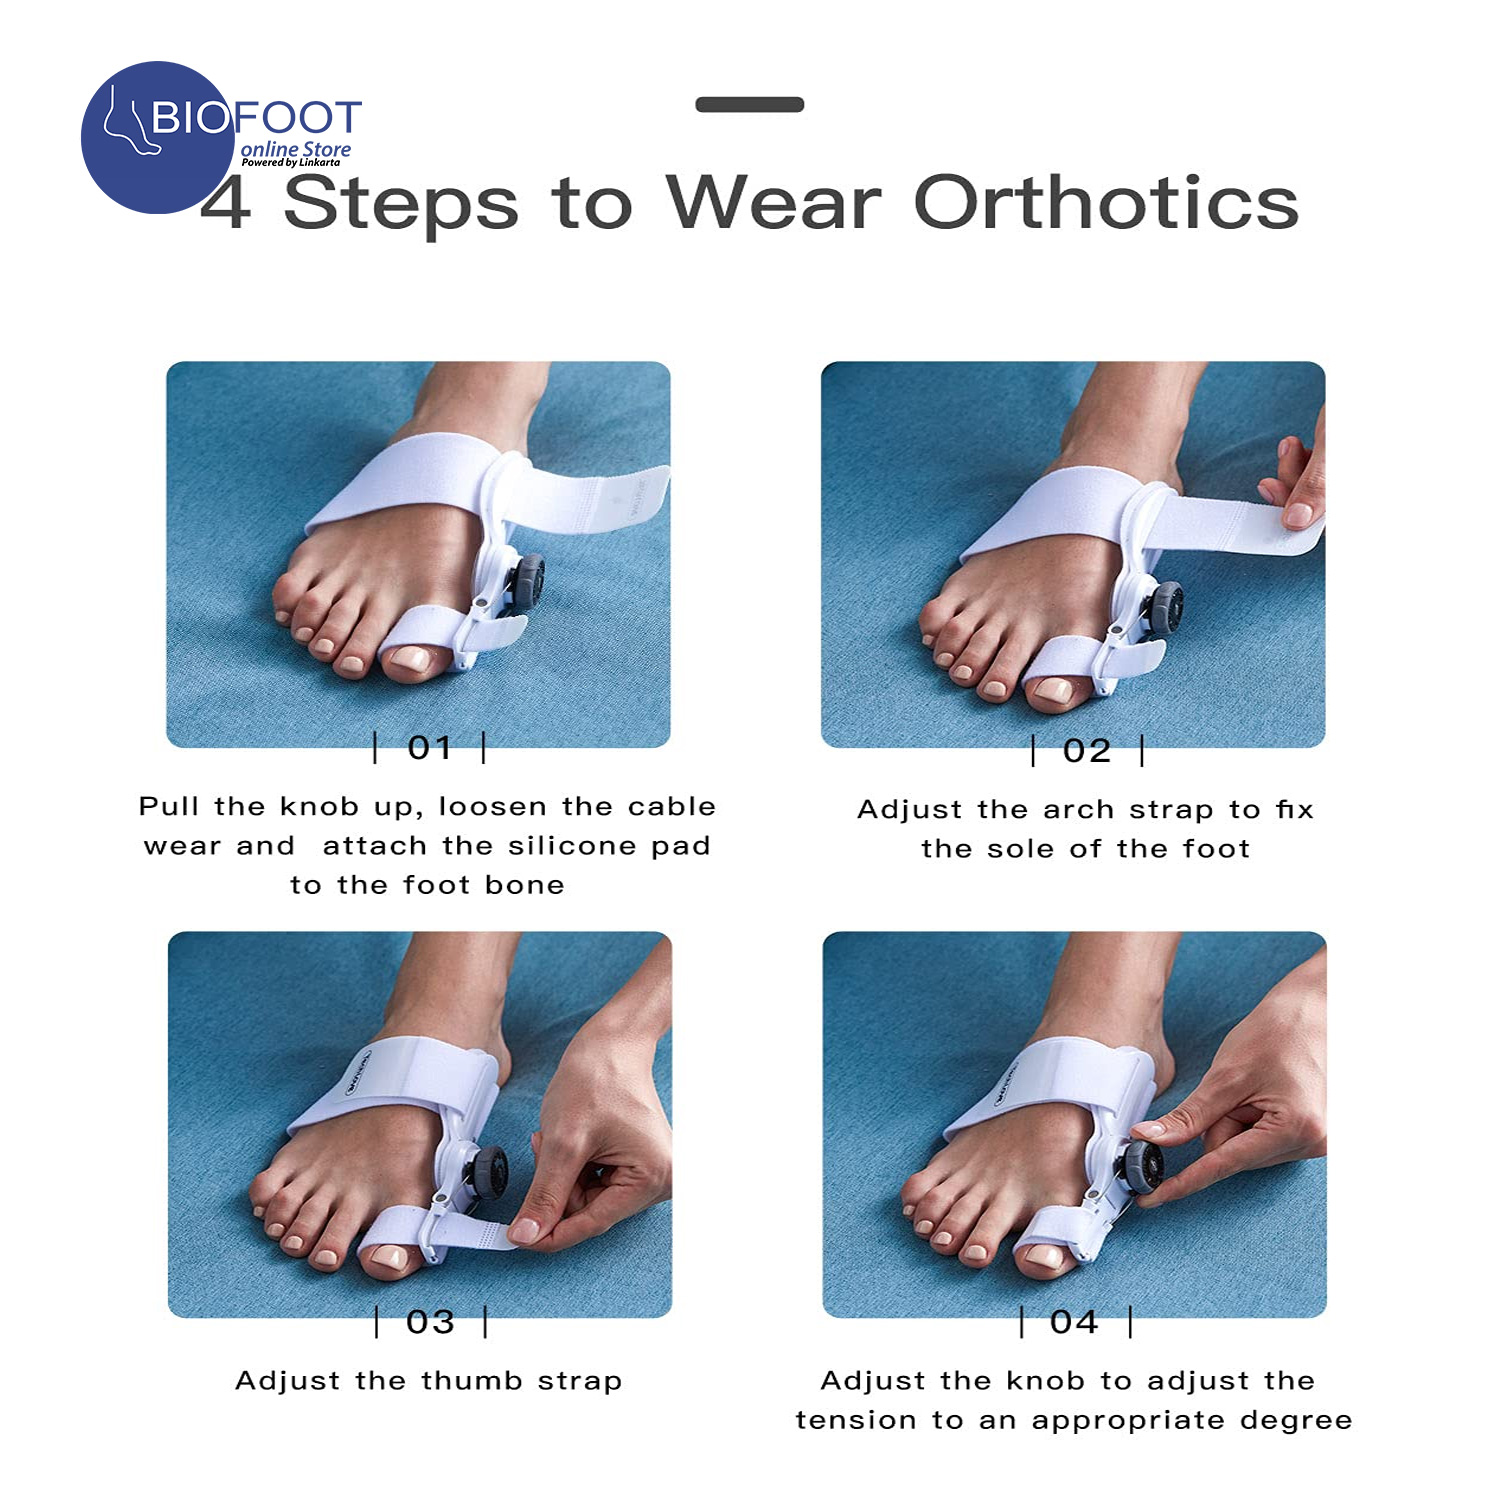 Arch Support Bunion Brace – Alpha Orthotics cures bunion pain with